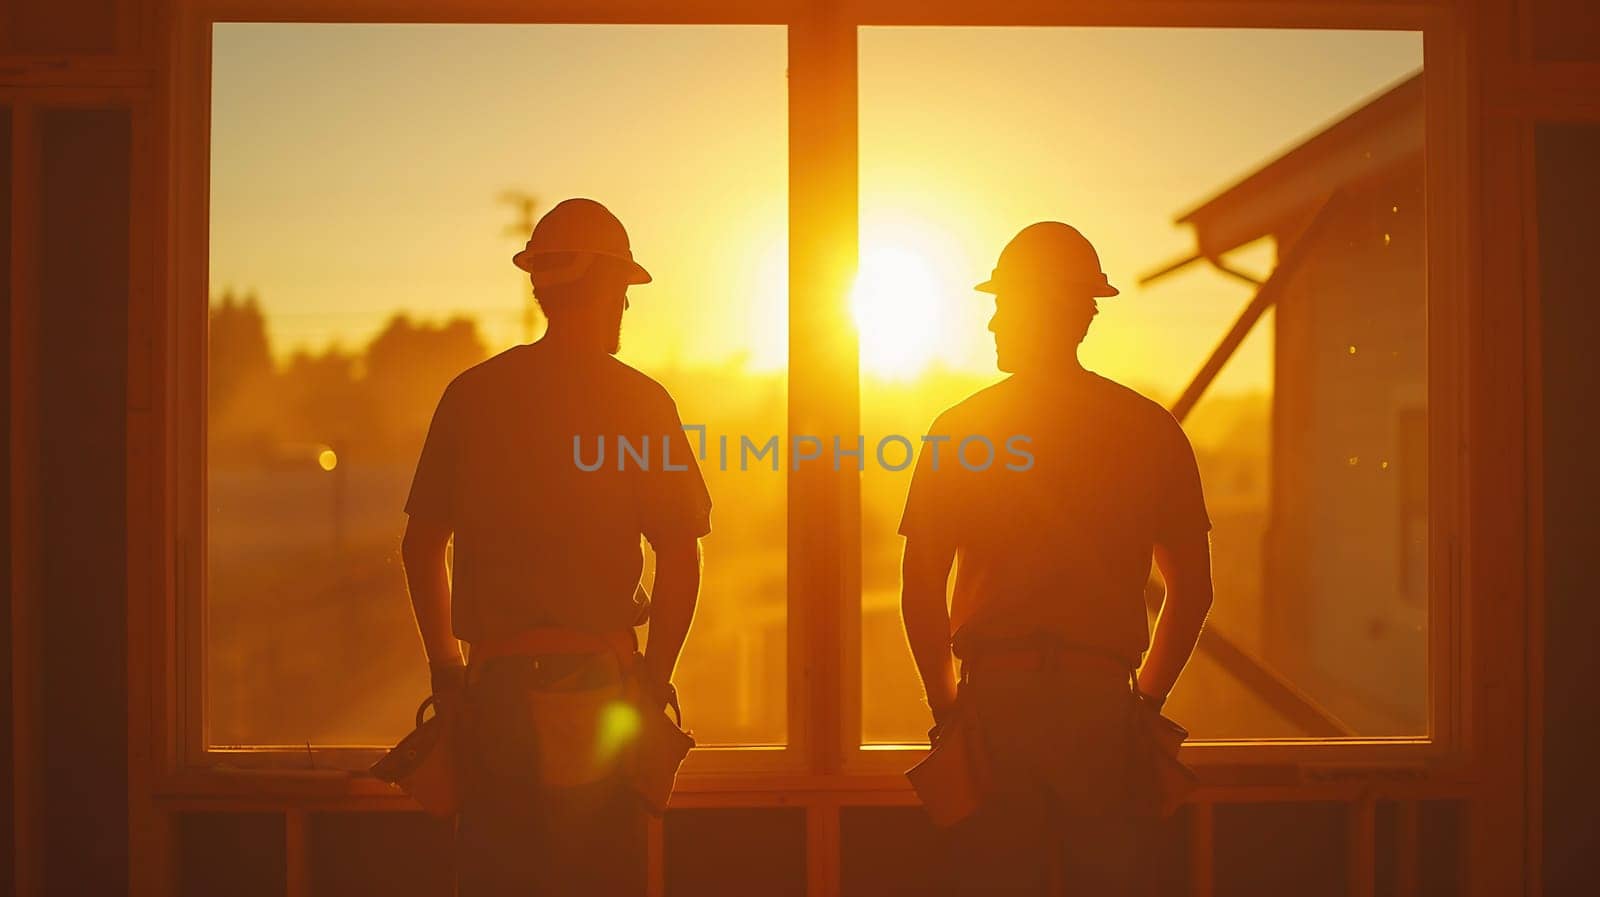 Two men dressed in shirts, orange work vests and helmets explore construction documentation on the building site near the wooden building constructions by Andelov13